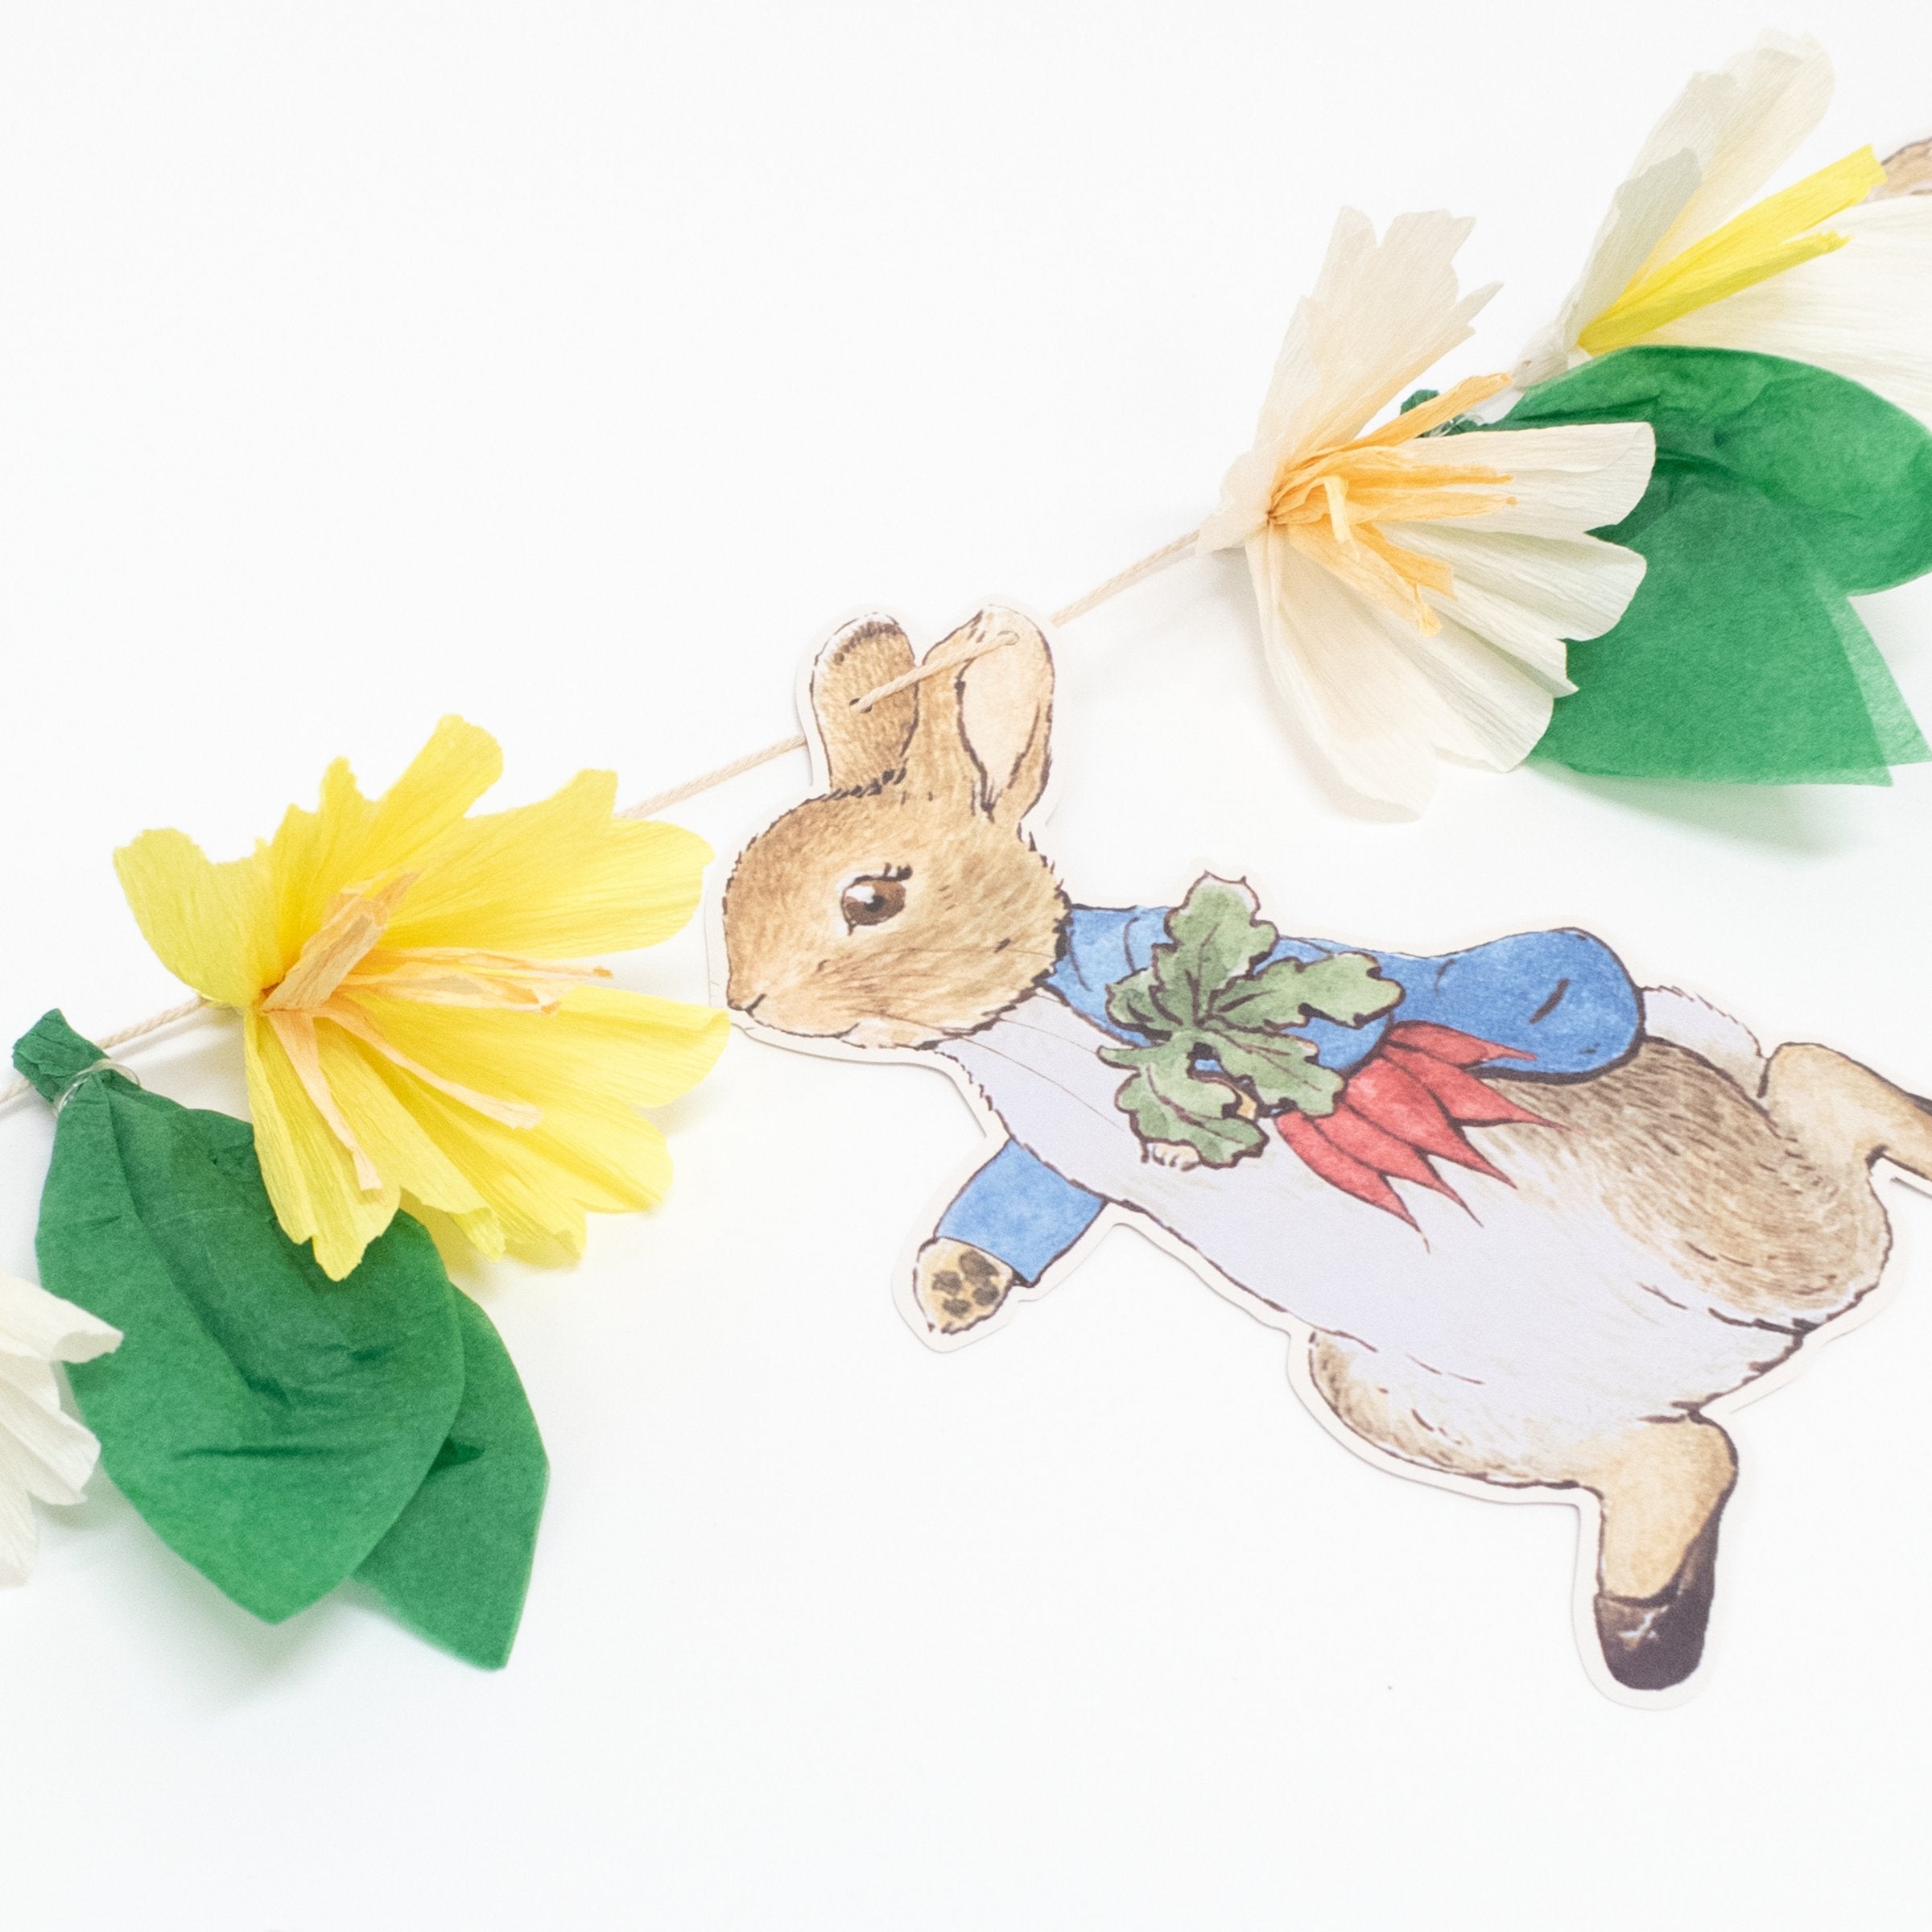 This charming garland features 5 Peter Rabbit characters and 6 floral pennants for a wonderful decorative effect.